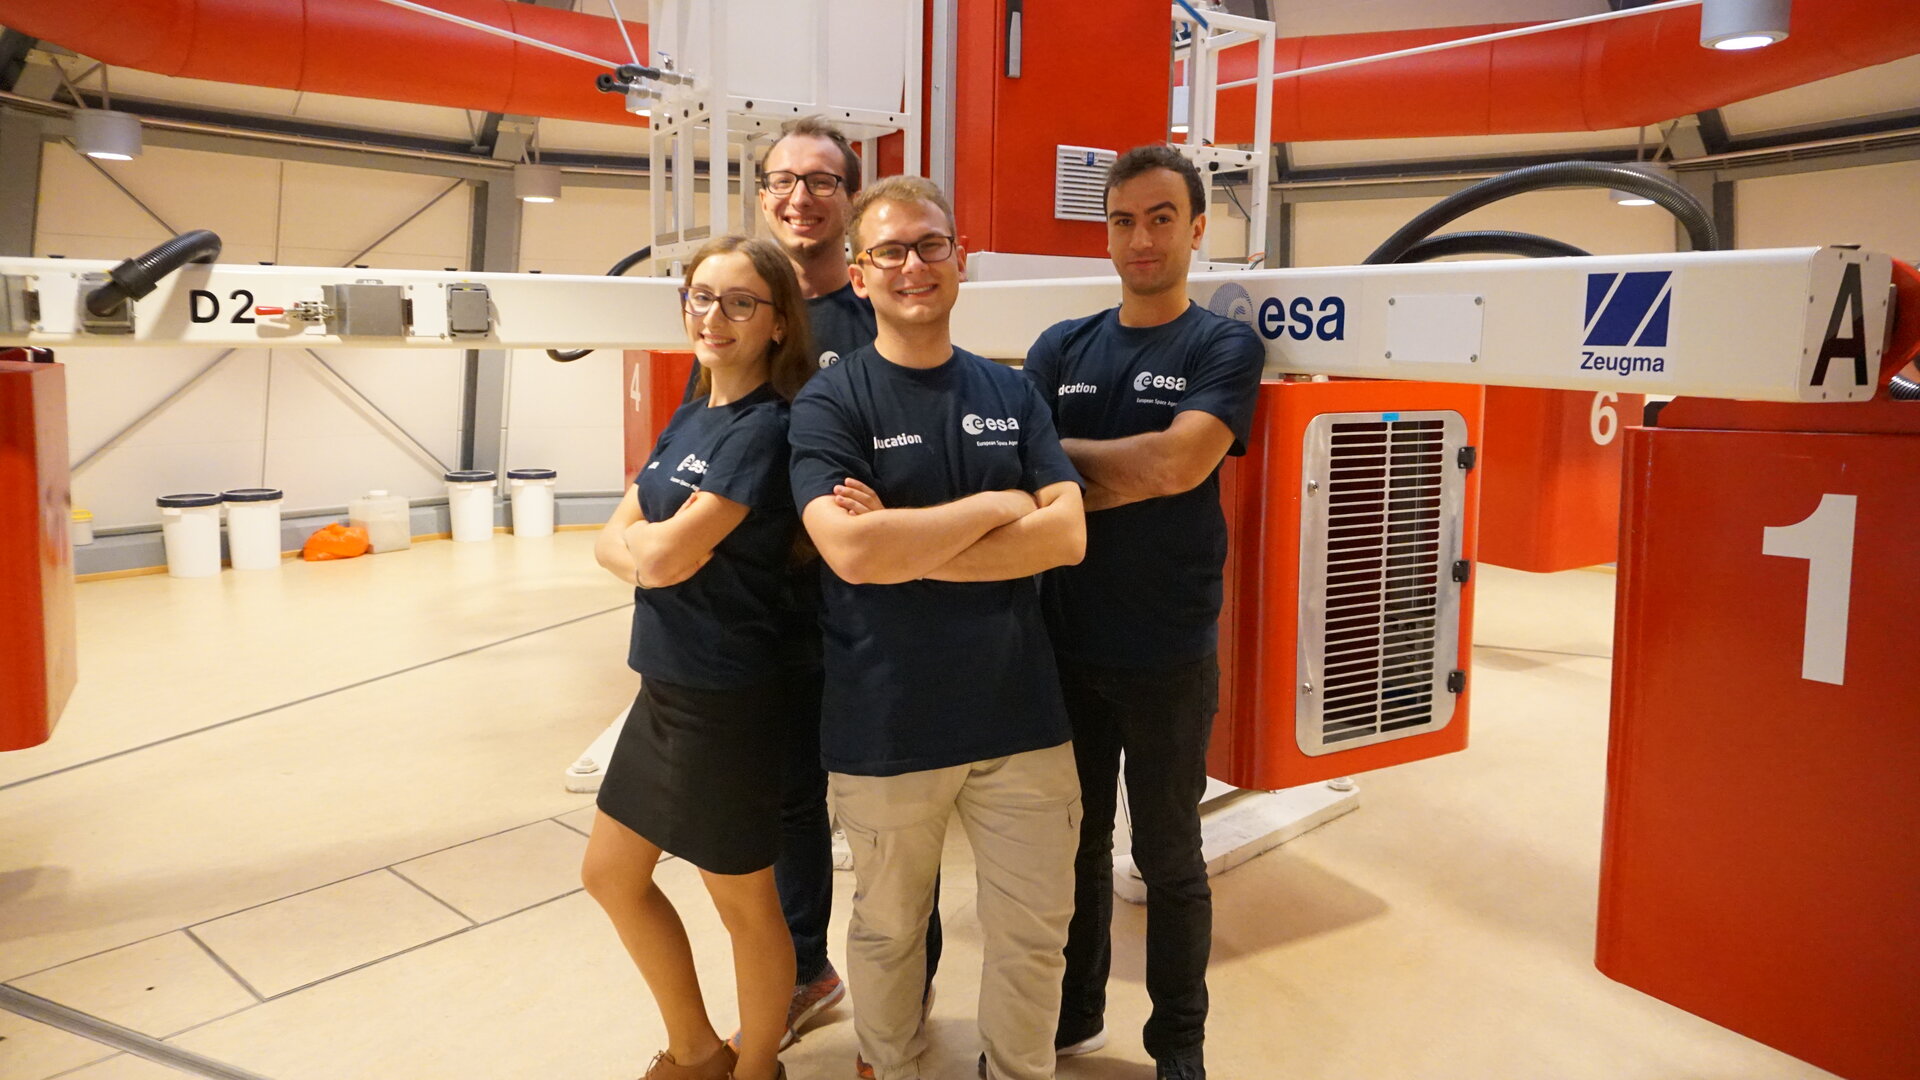 The complete HyperCells team with the Large Diameter Centrifuge